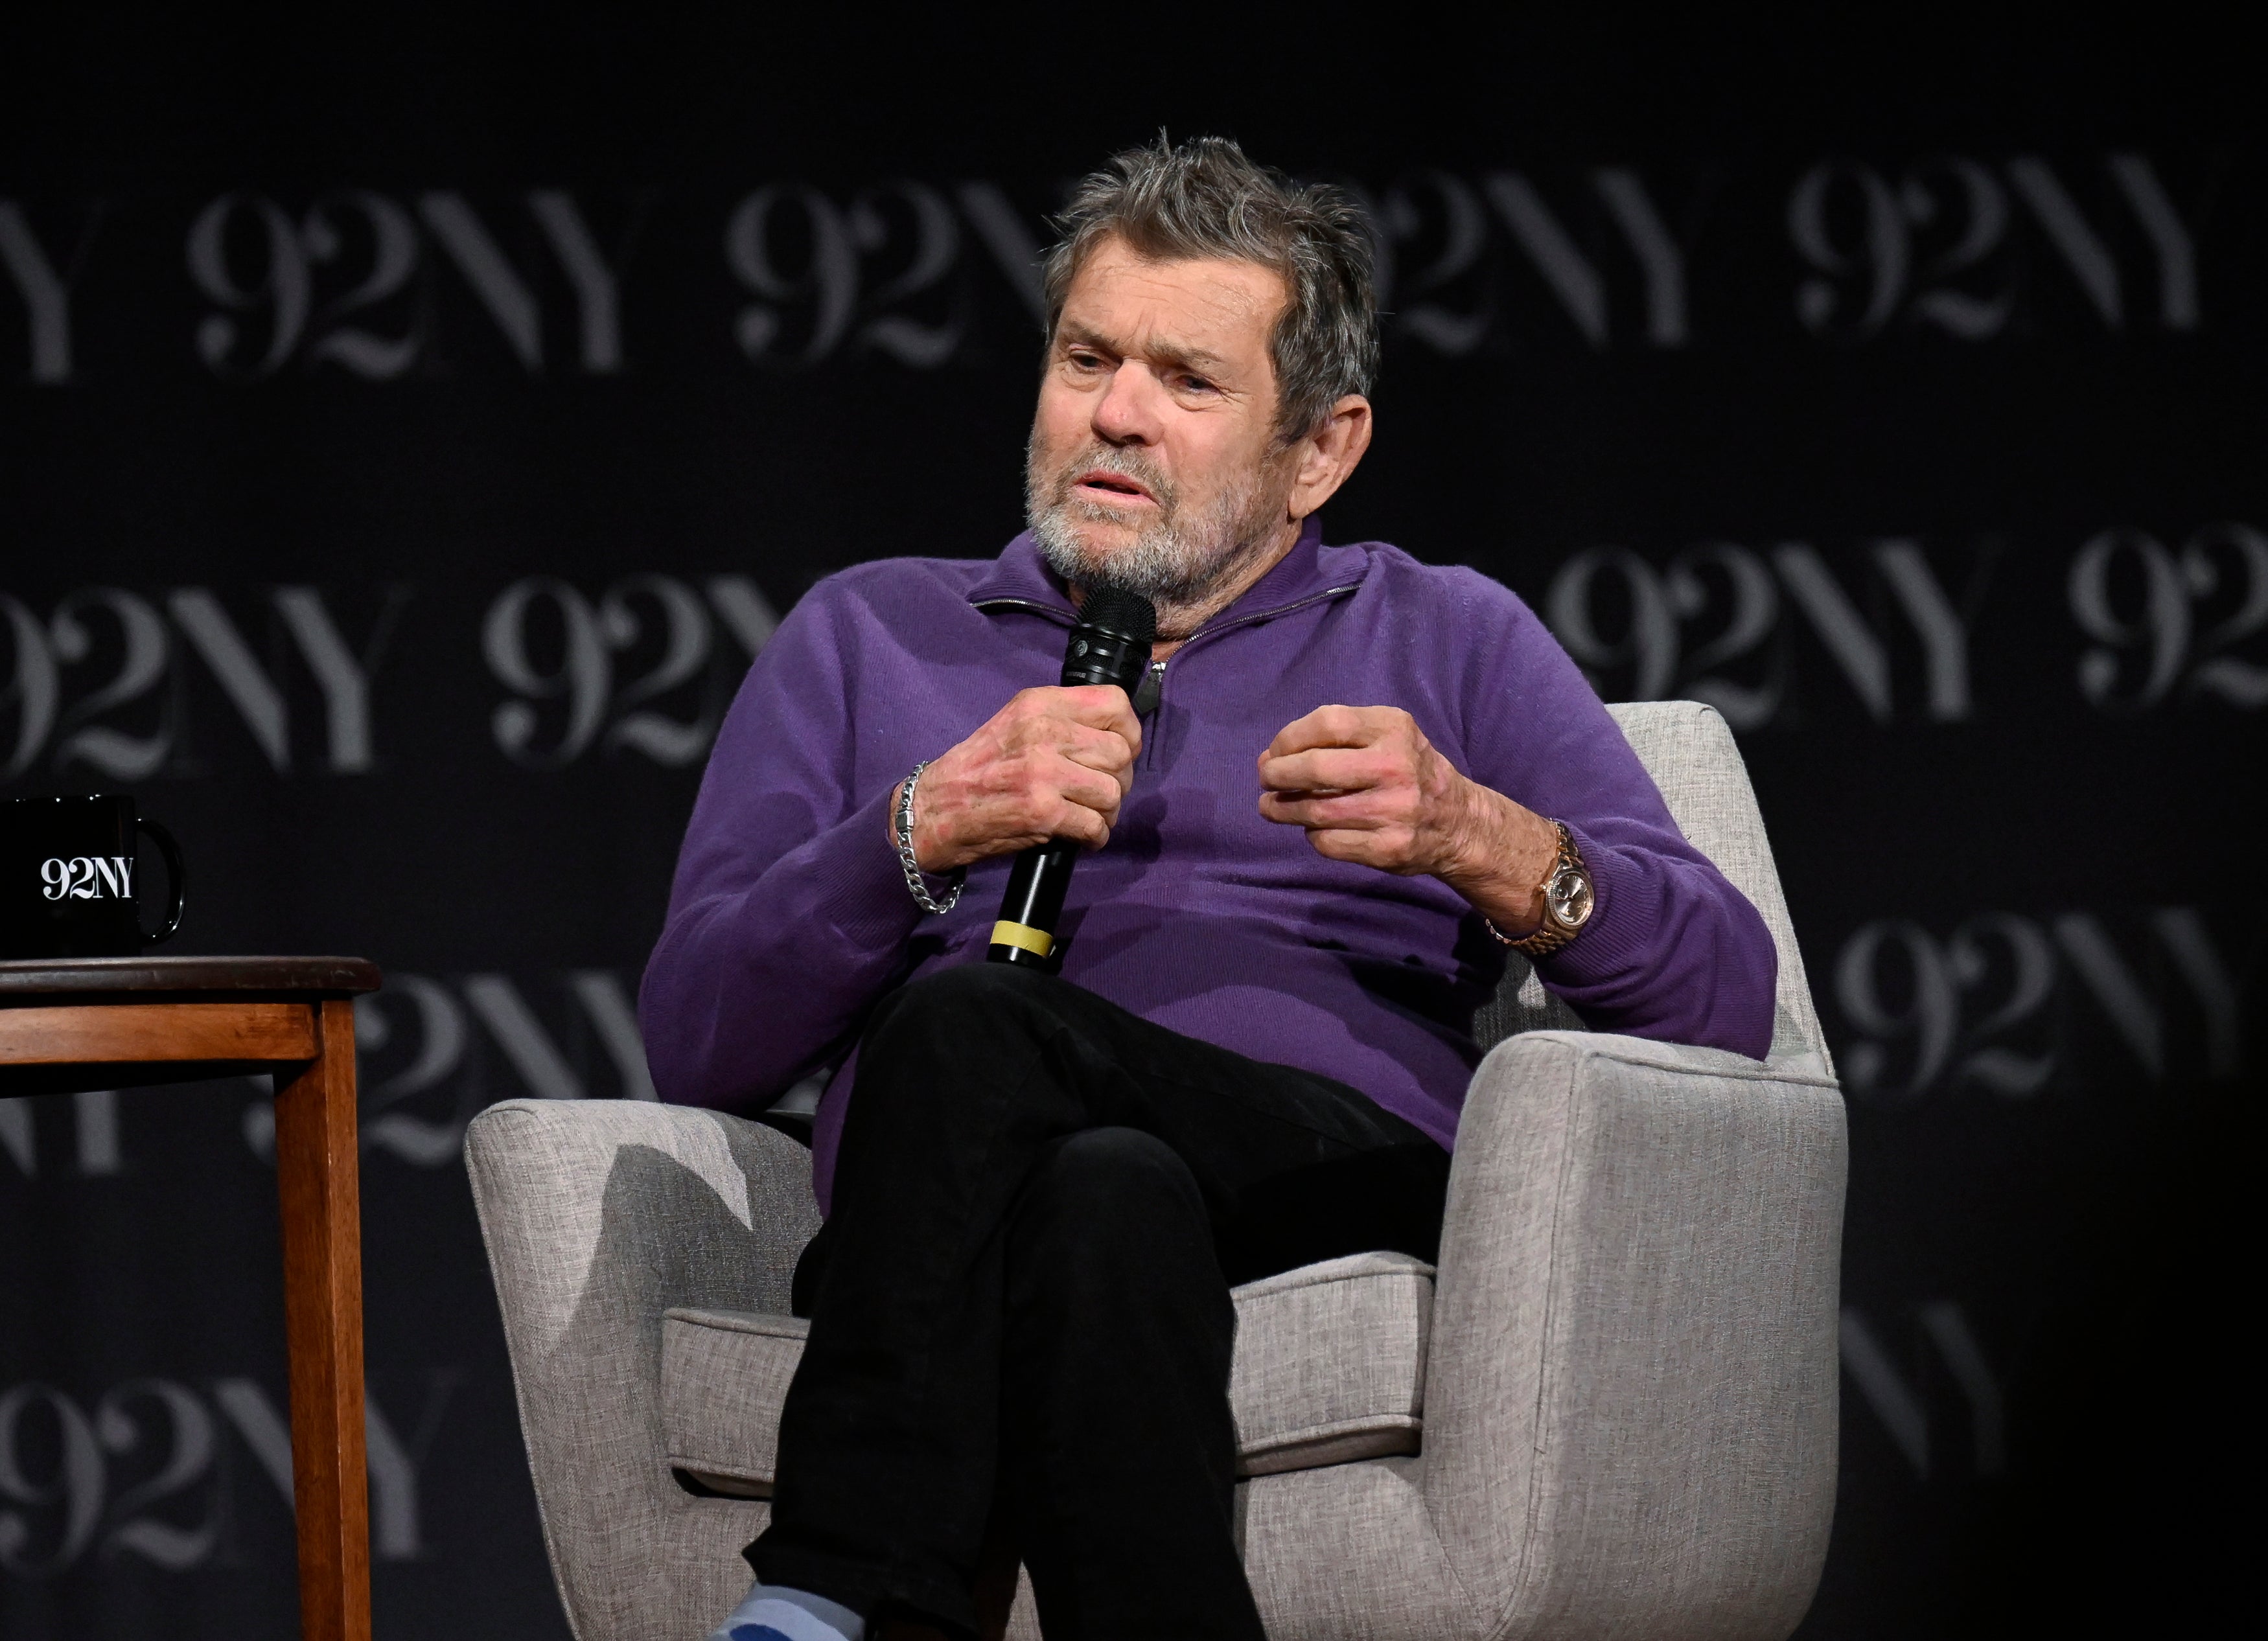 Jann Wenner apologised for remarks he made in a New York Times interview